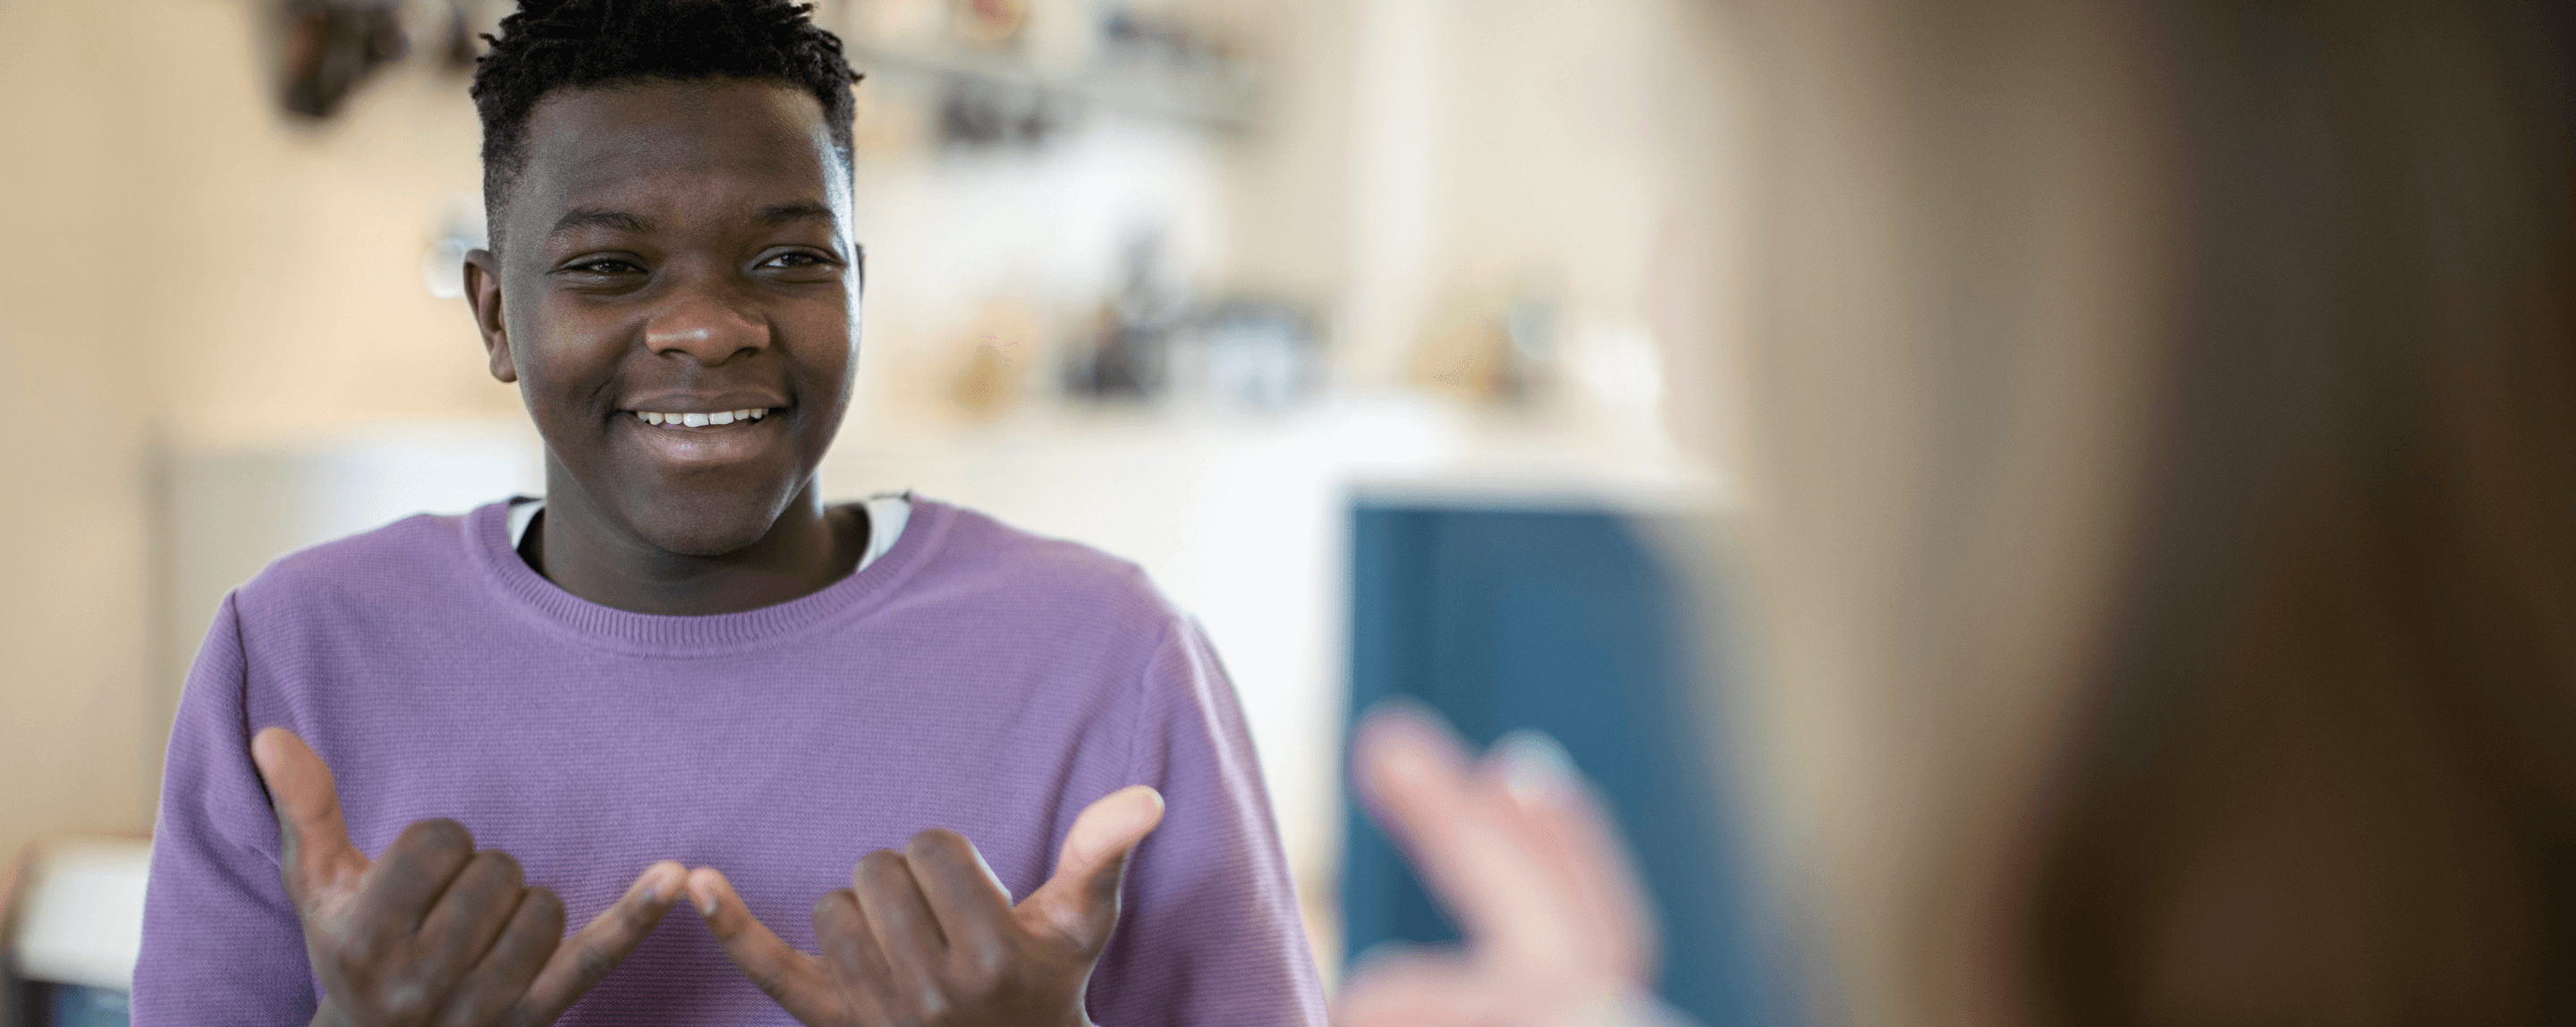 Young black man communicating using sign language. He is smiling. He is to the left of the screen and is wearing a purple top.